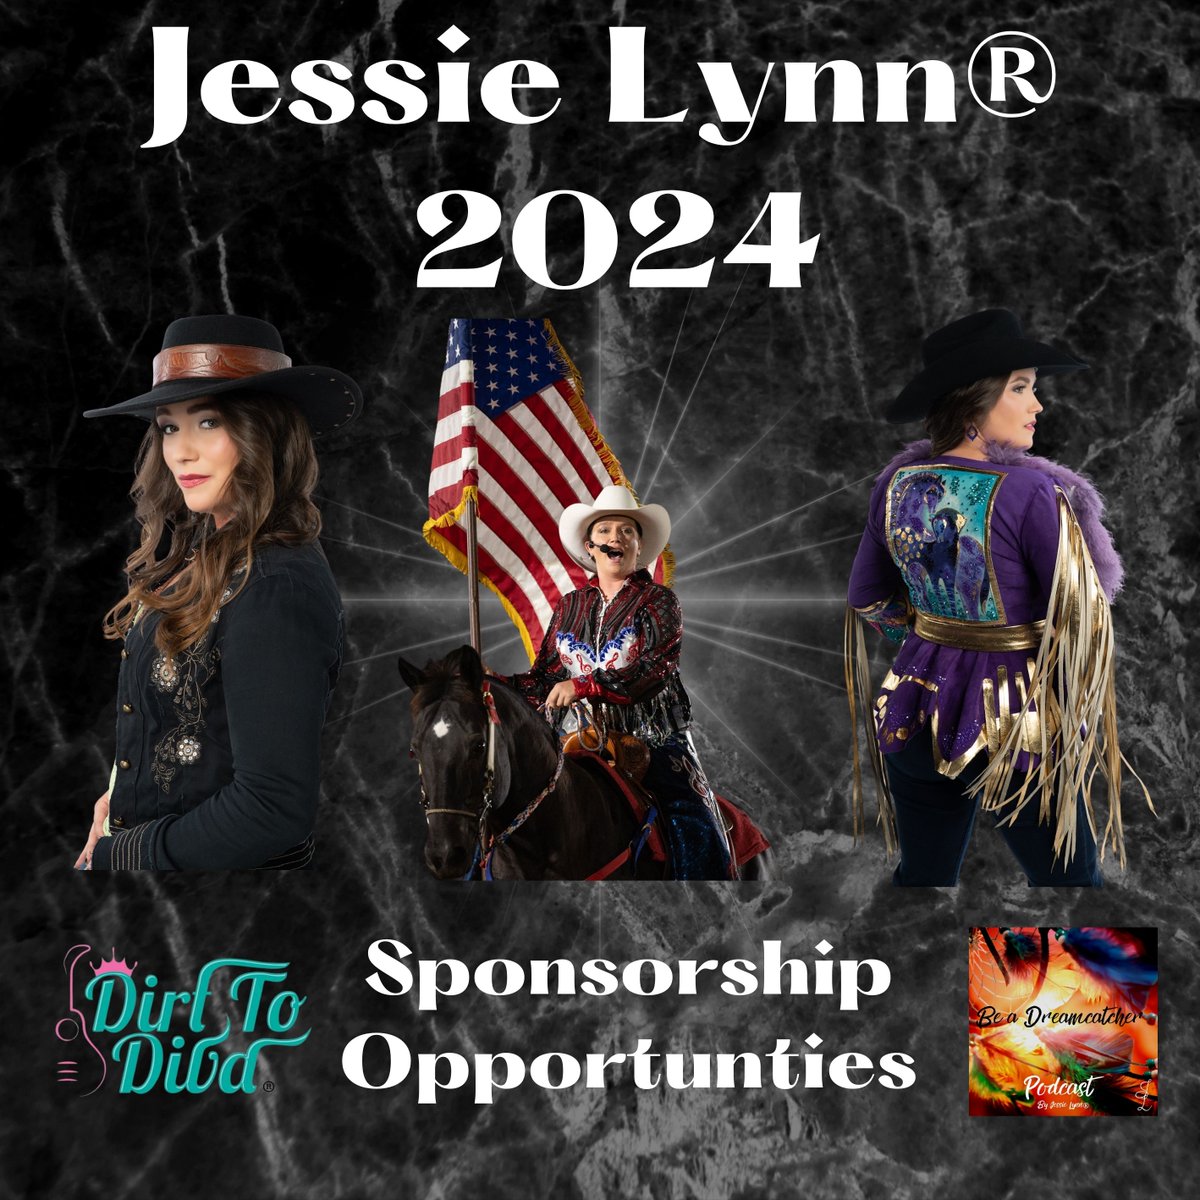 .@JessieLynnJL says: 2024 Sponsorship Opportunities Now Available at jessielynn.net ! Have you wanted to take your business, product, or fan reach to next level? Then consider sponsoring Dirt to Diva Productions very own, Jessie Lynn®!